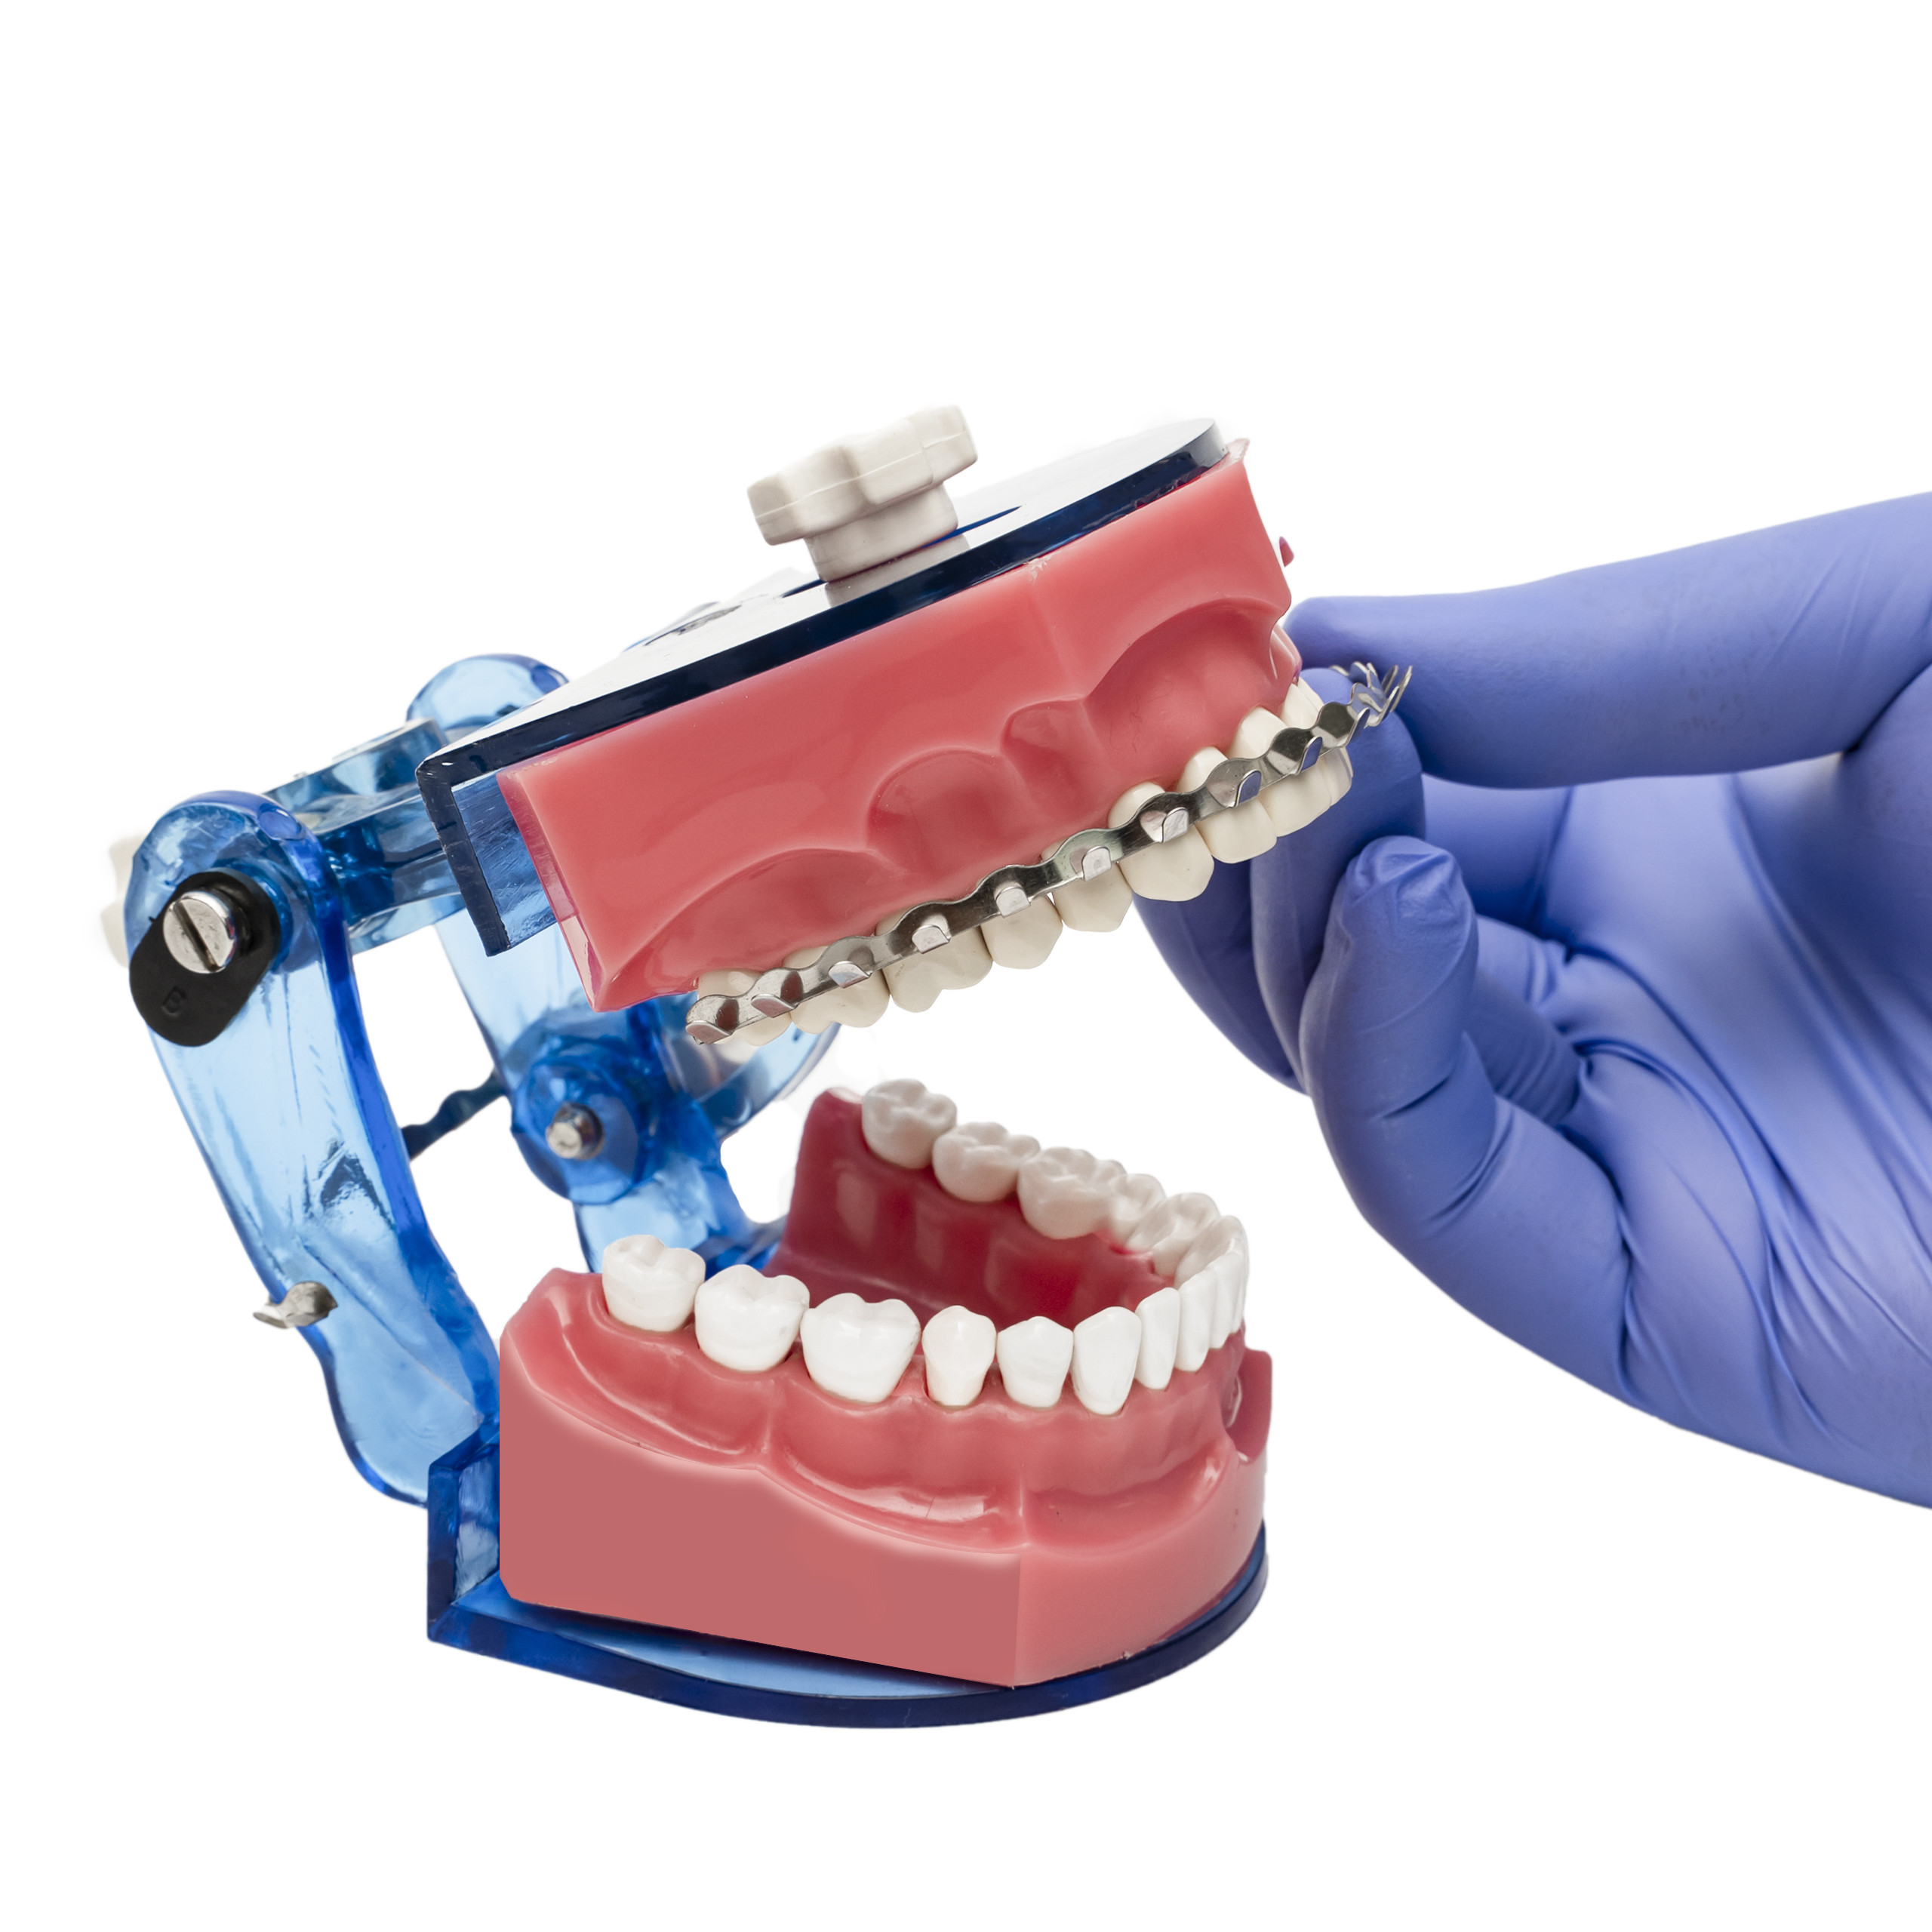 Orthotech Orthodontic Arch Bar